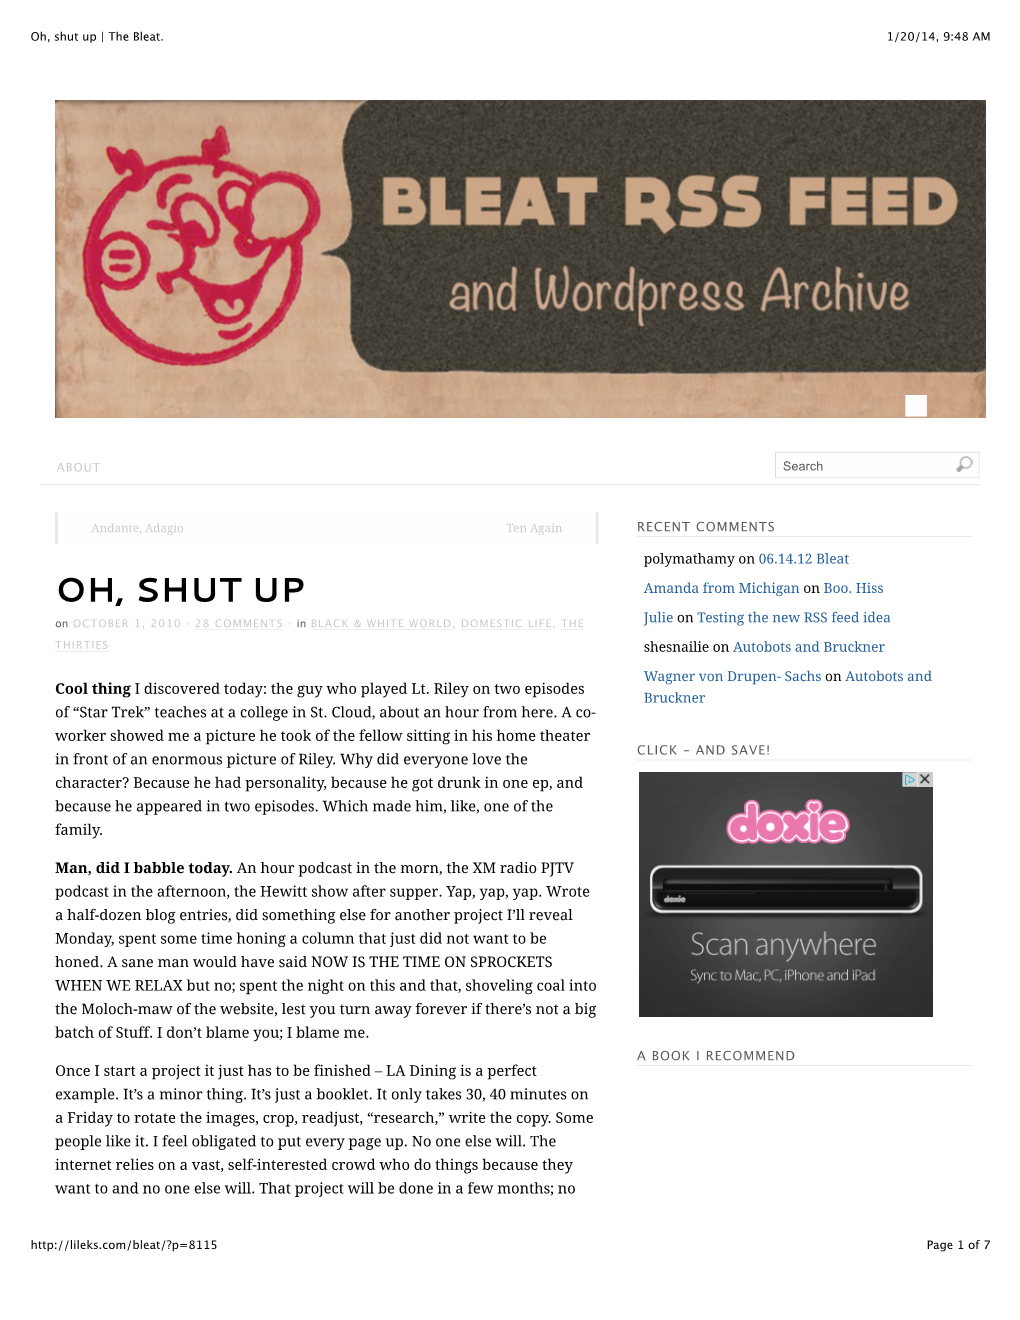 Oh, Shut up | the Bleat